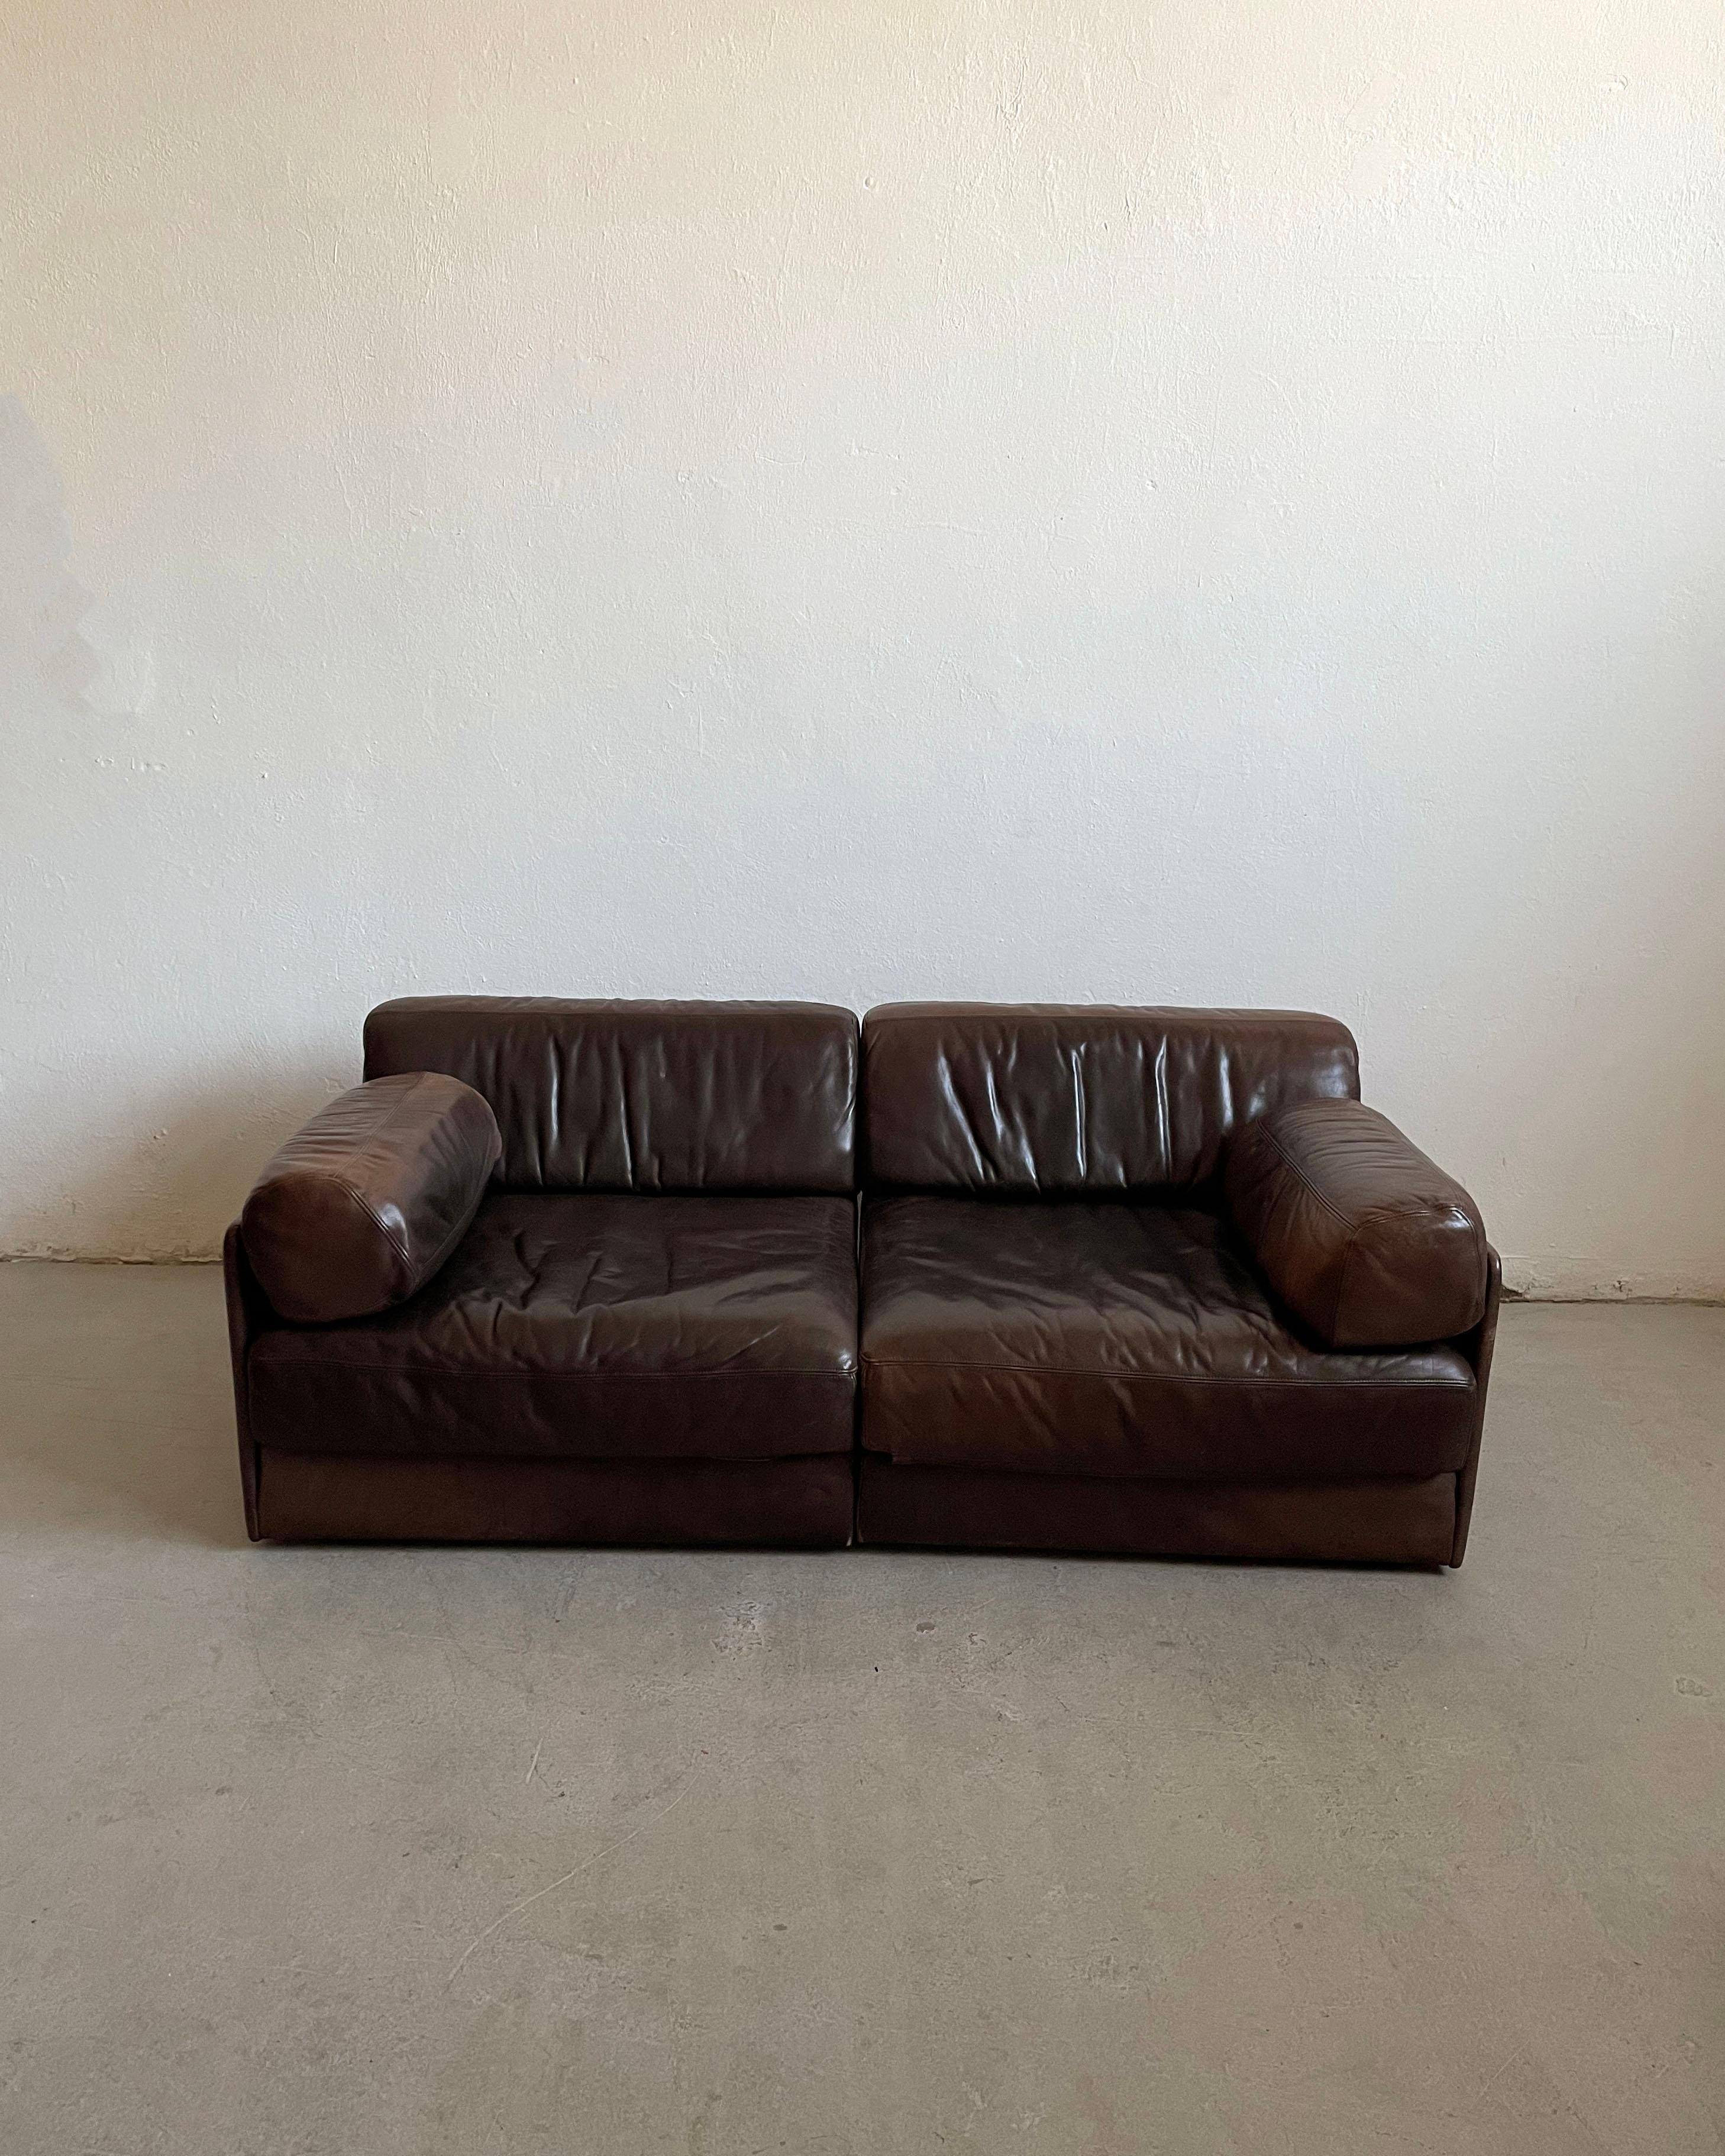 Vintage De Sede 2-piece modular sofa bed, model 'DS-76', leather, fabric, foam, wooden frame, Switzerland 1970s.

Important: The item offered for sale is in good original condition. The leather shows beautiful age related patina. One of the armrest